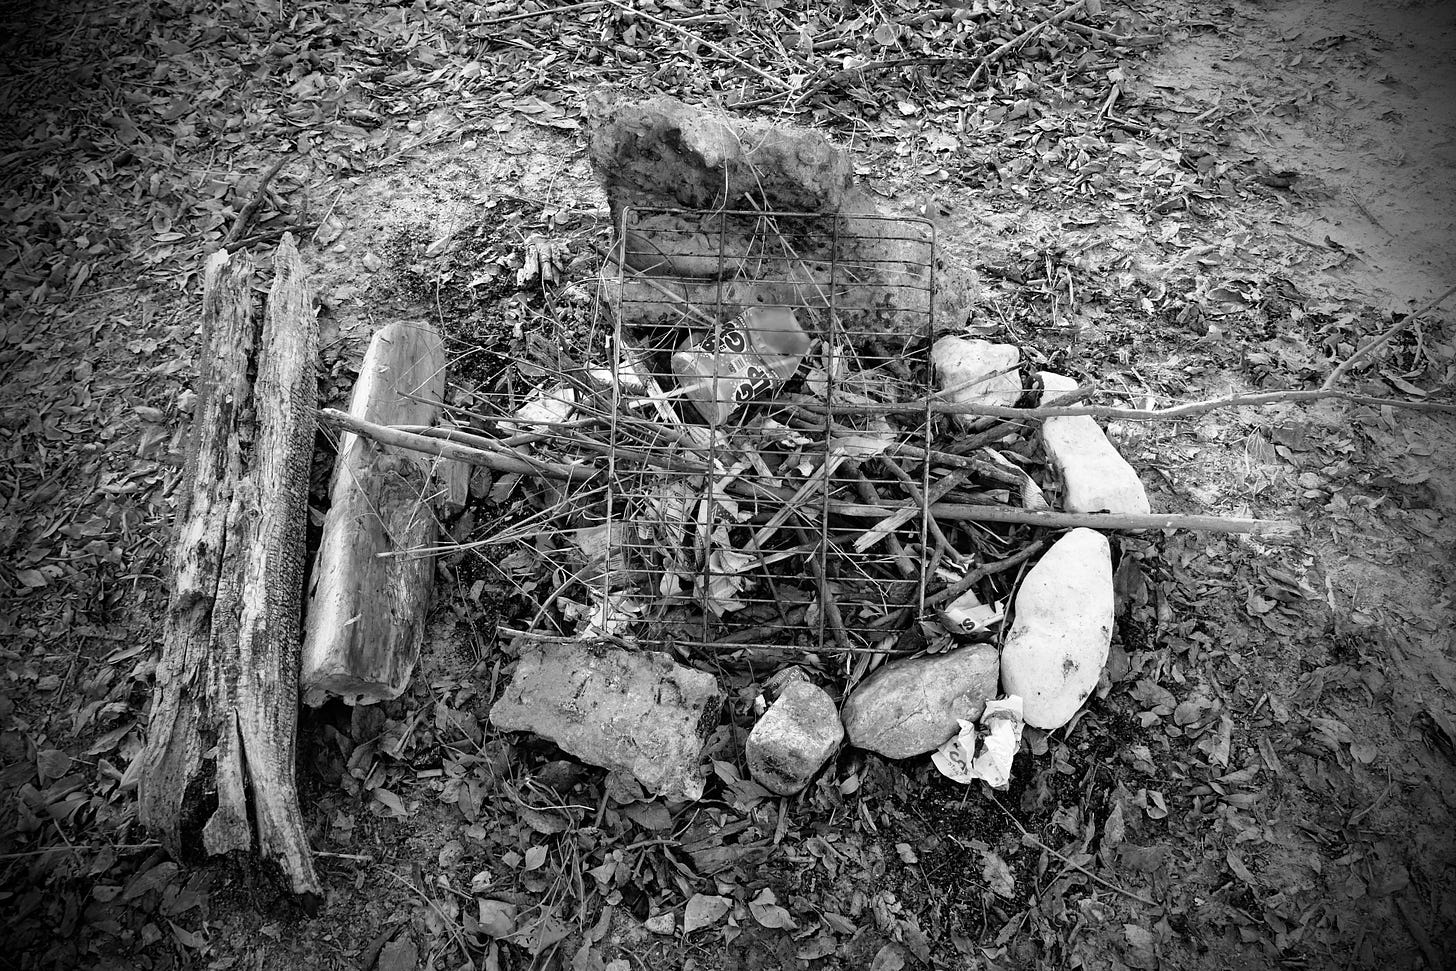 Black and white photo of a campfire in the urban woods